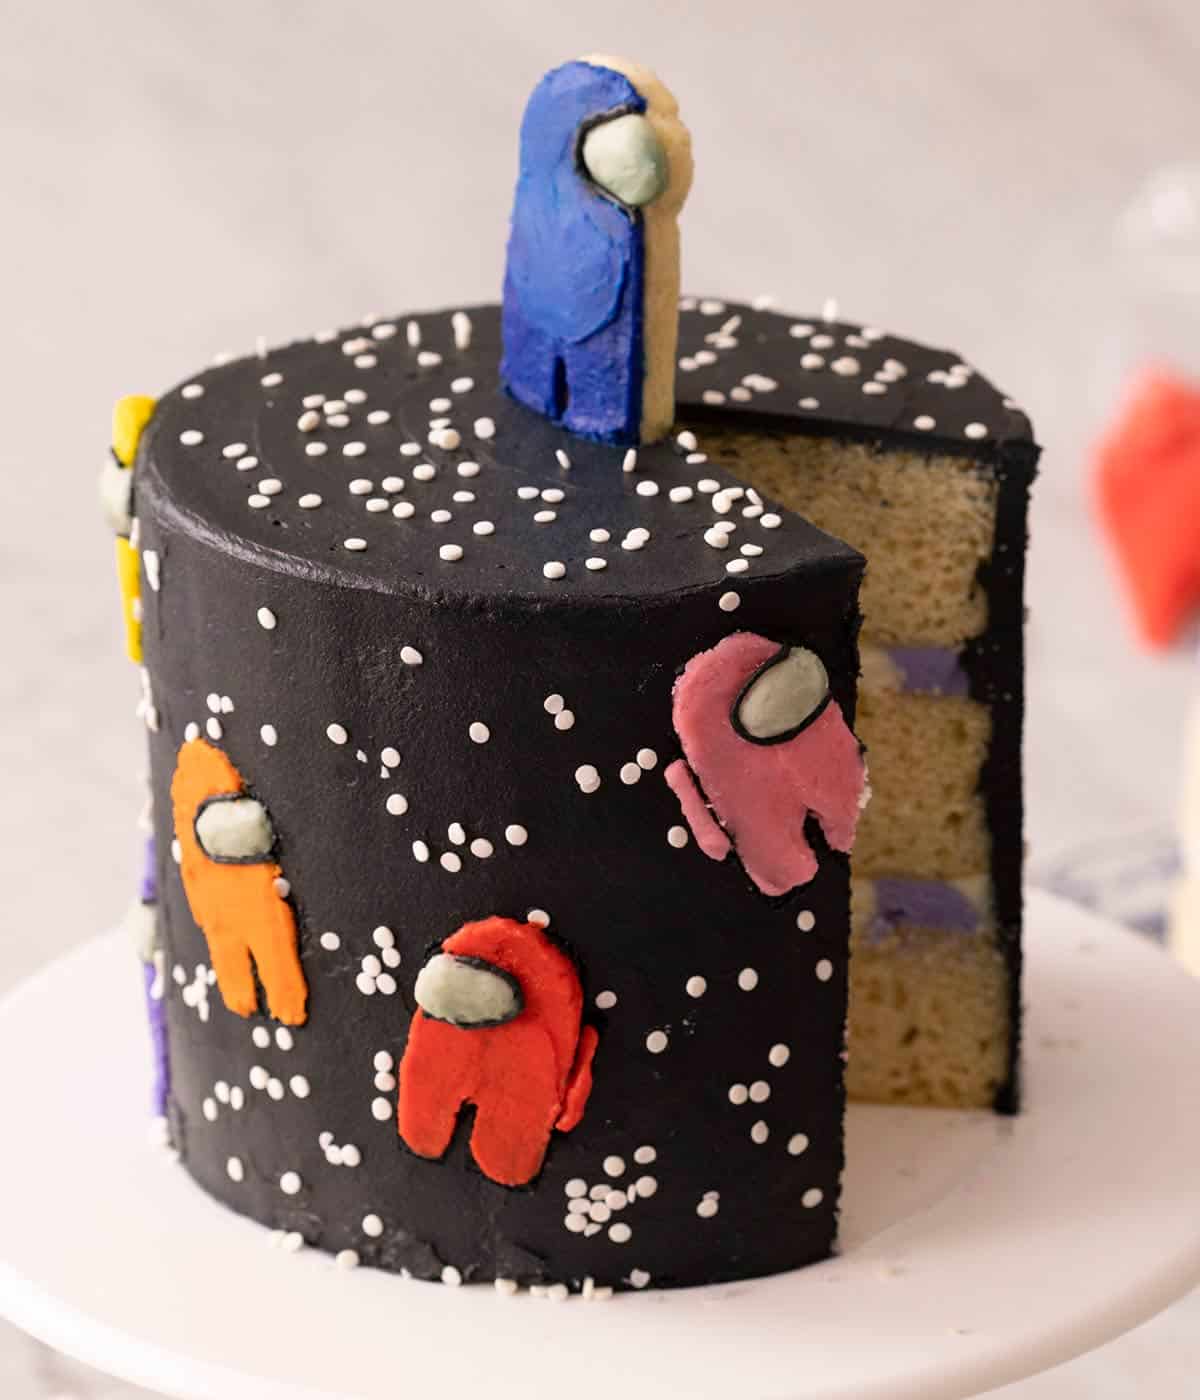 A close up of an among us cake with a slice removed